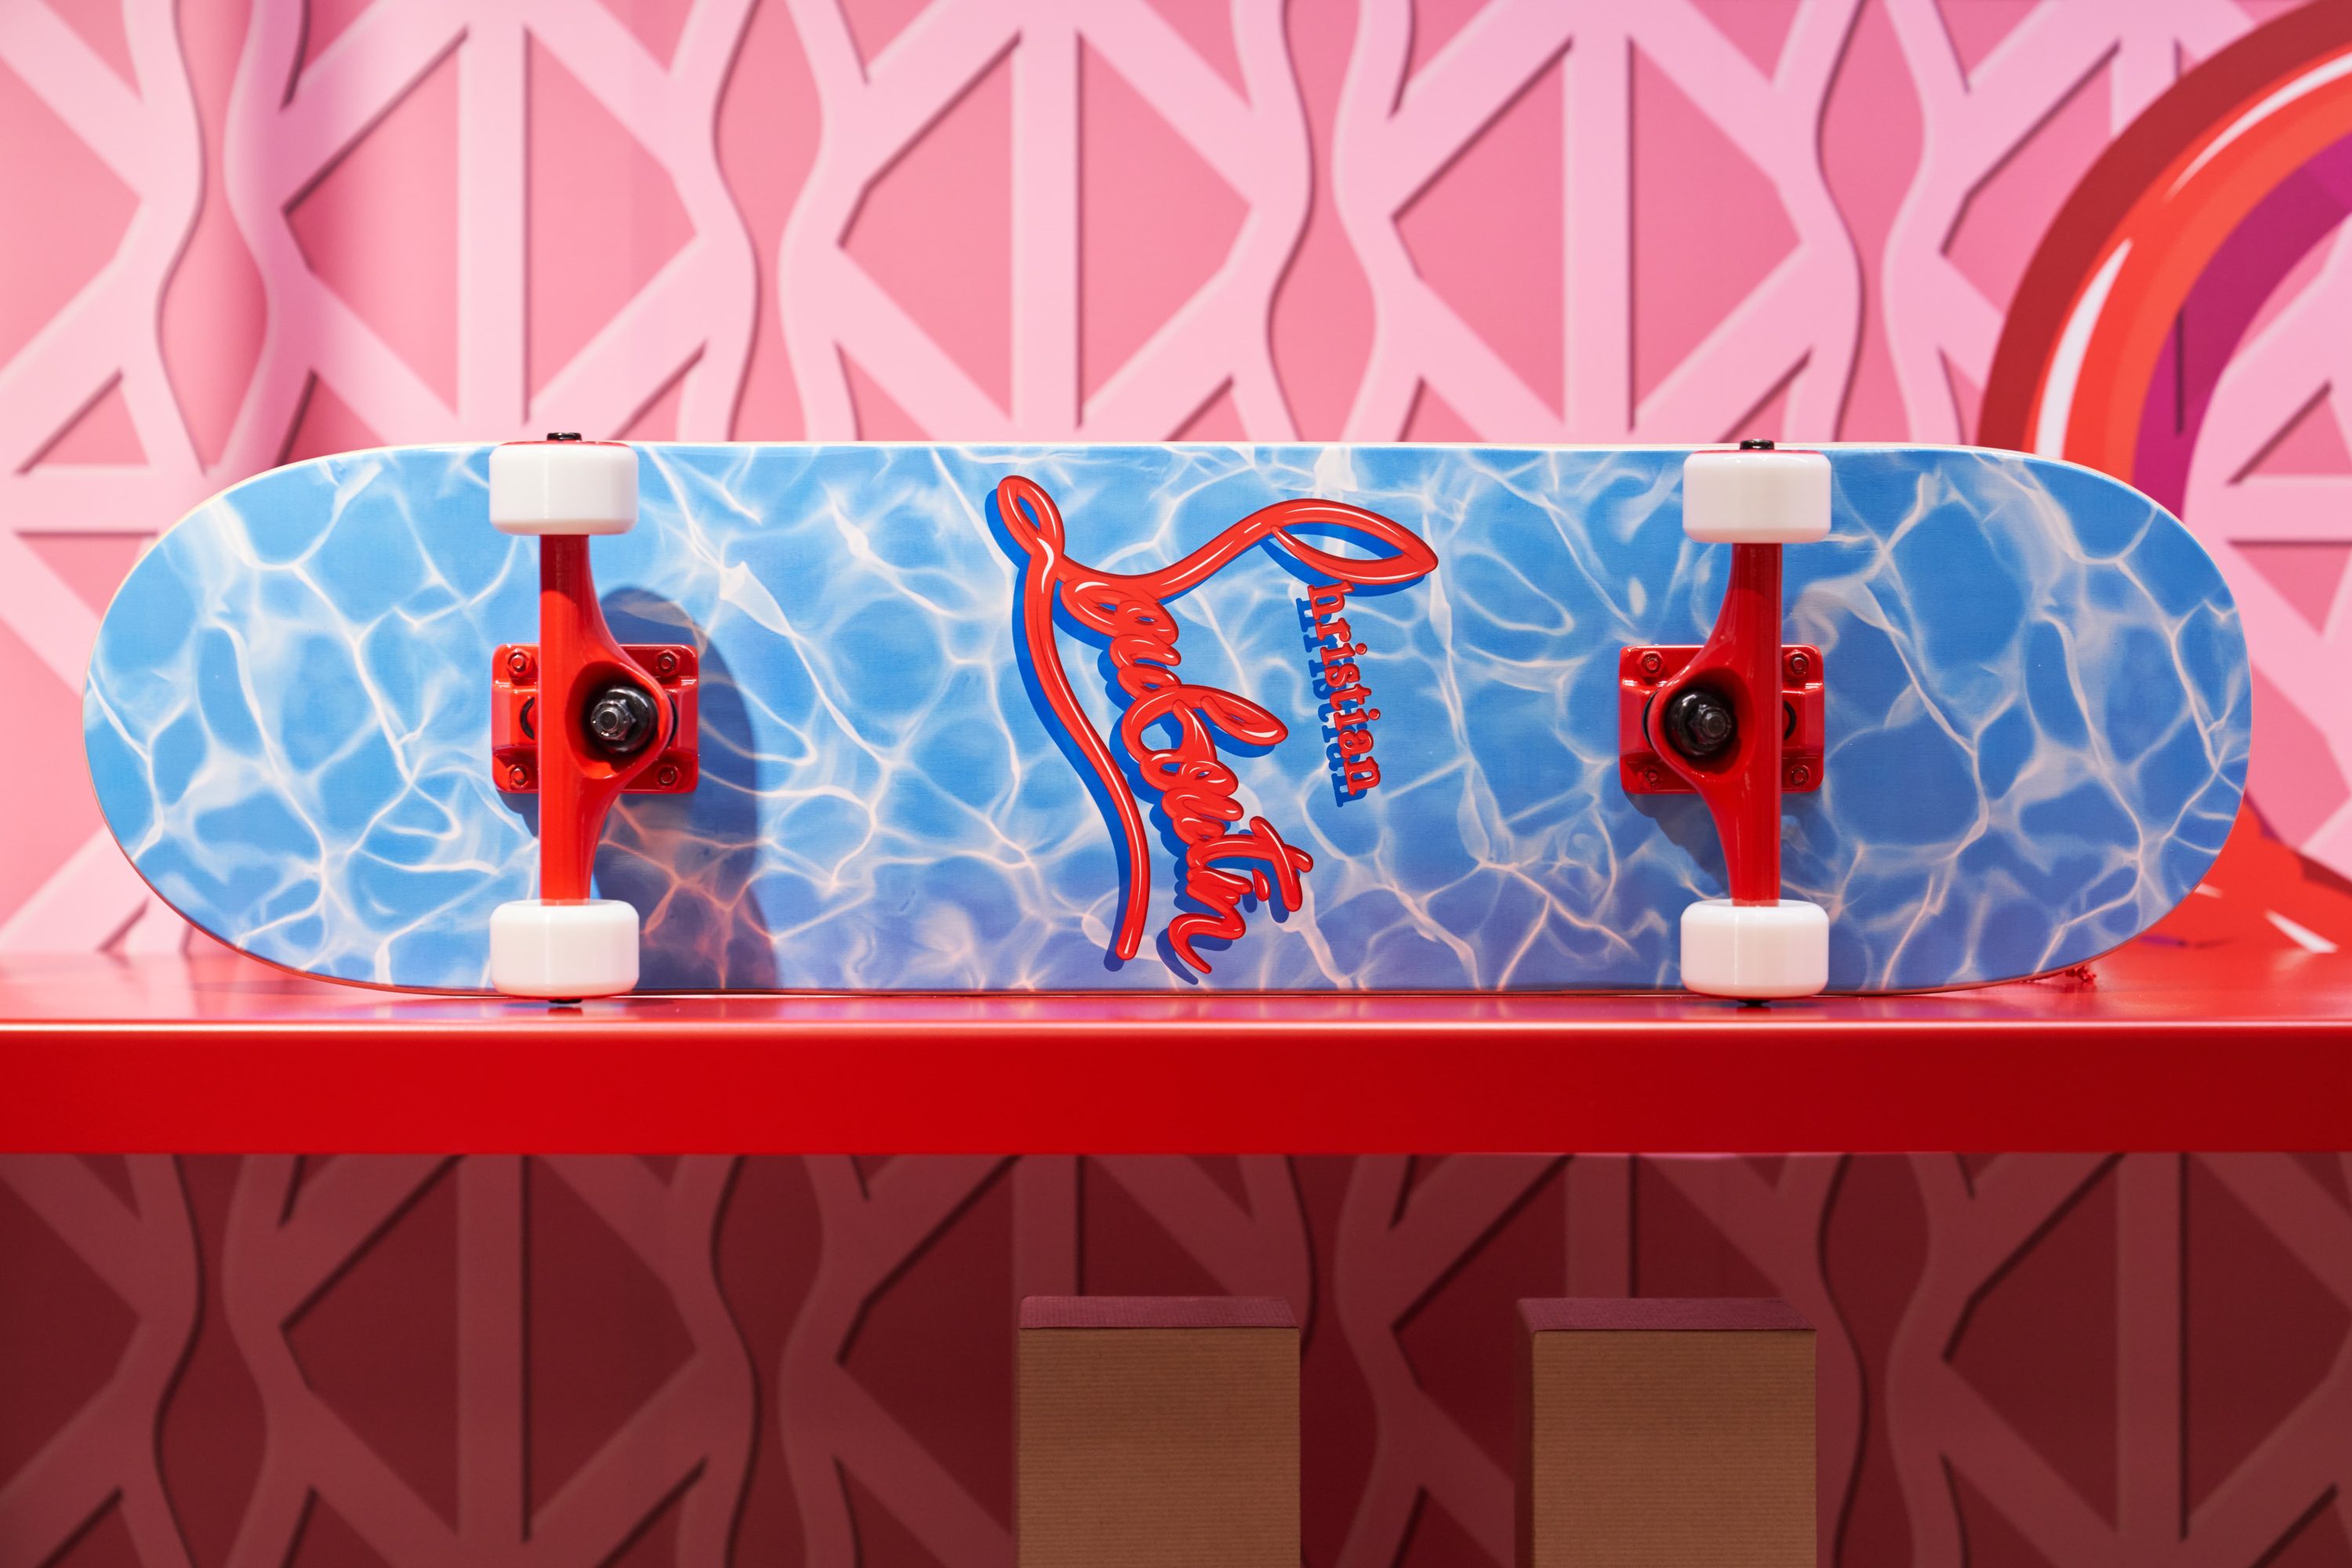 Christian Louboutin launches exclusive collection for Neiman Marcus with  immersive installation